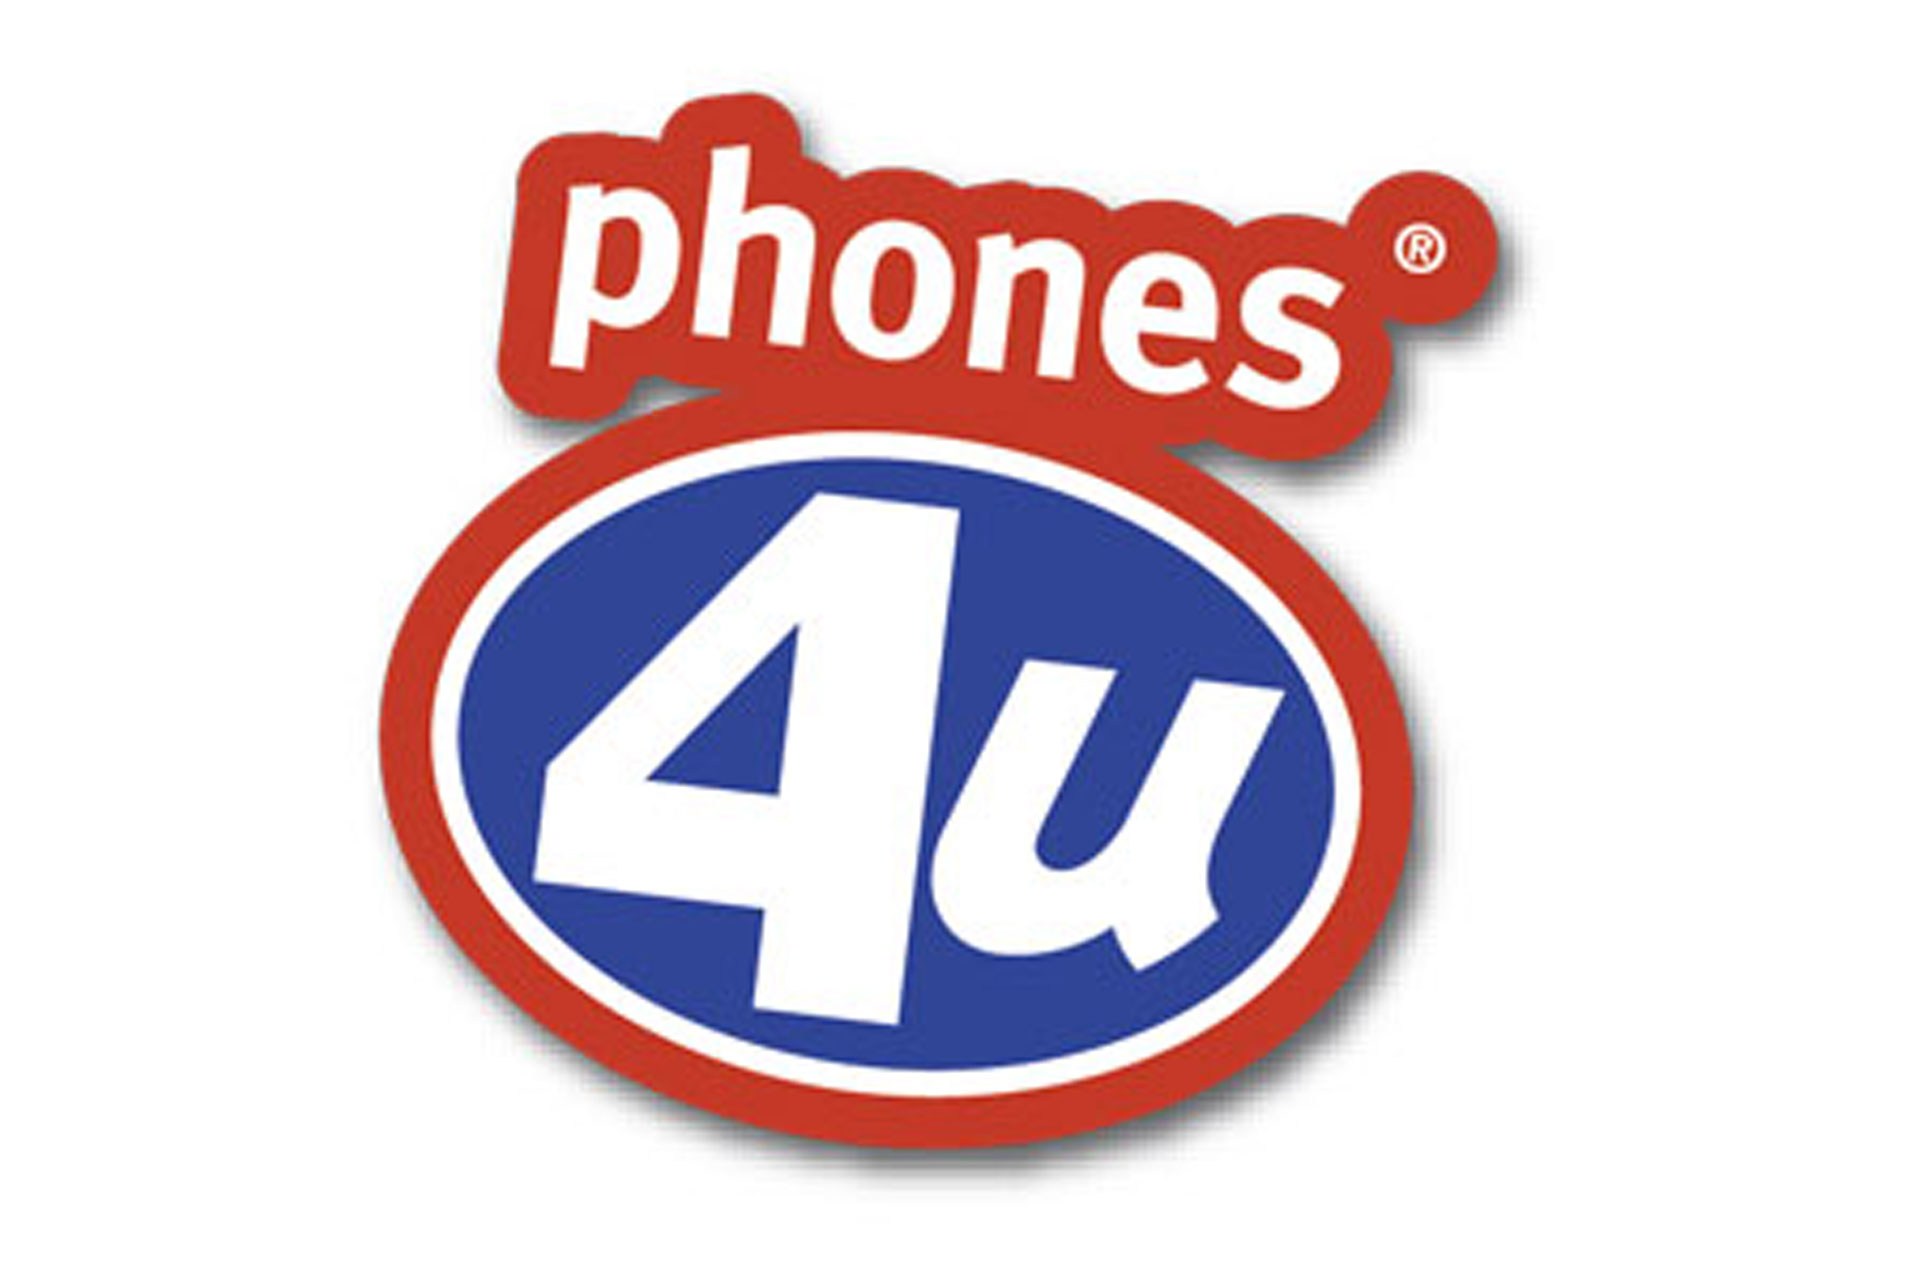 Why Did Phones4U Go Into Administration?